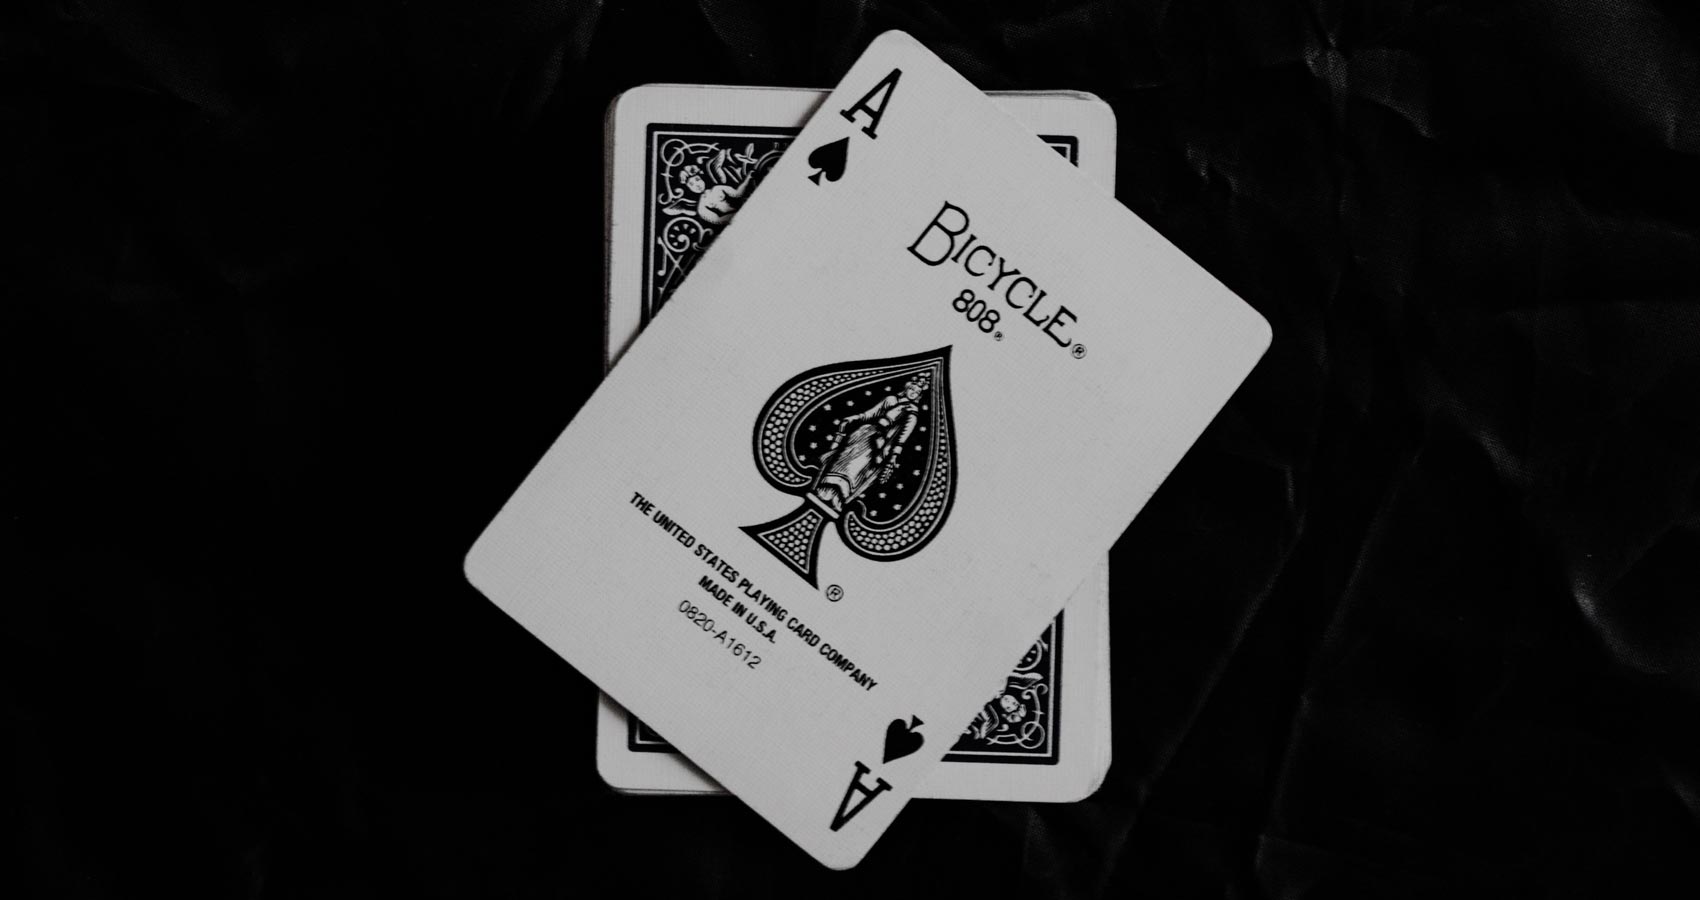 Card Game, a poem written by Jeff Flaig at Spillwords.com